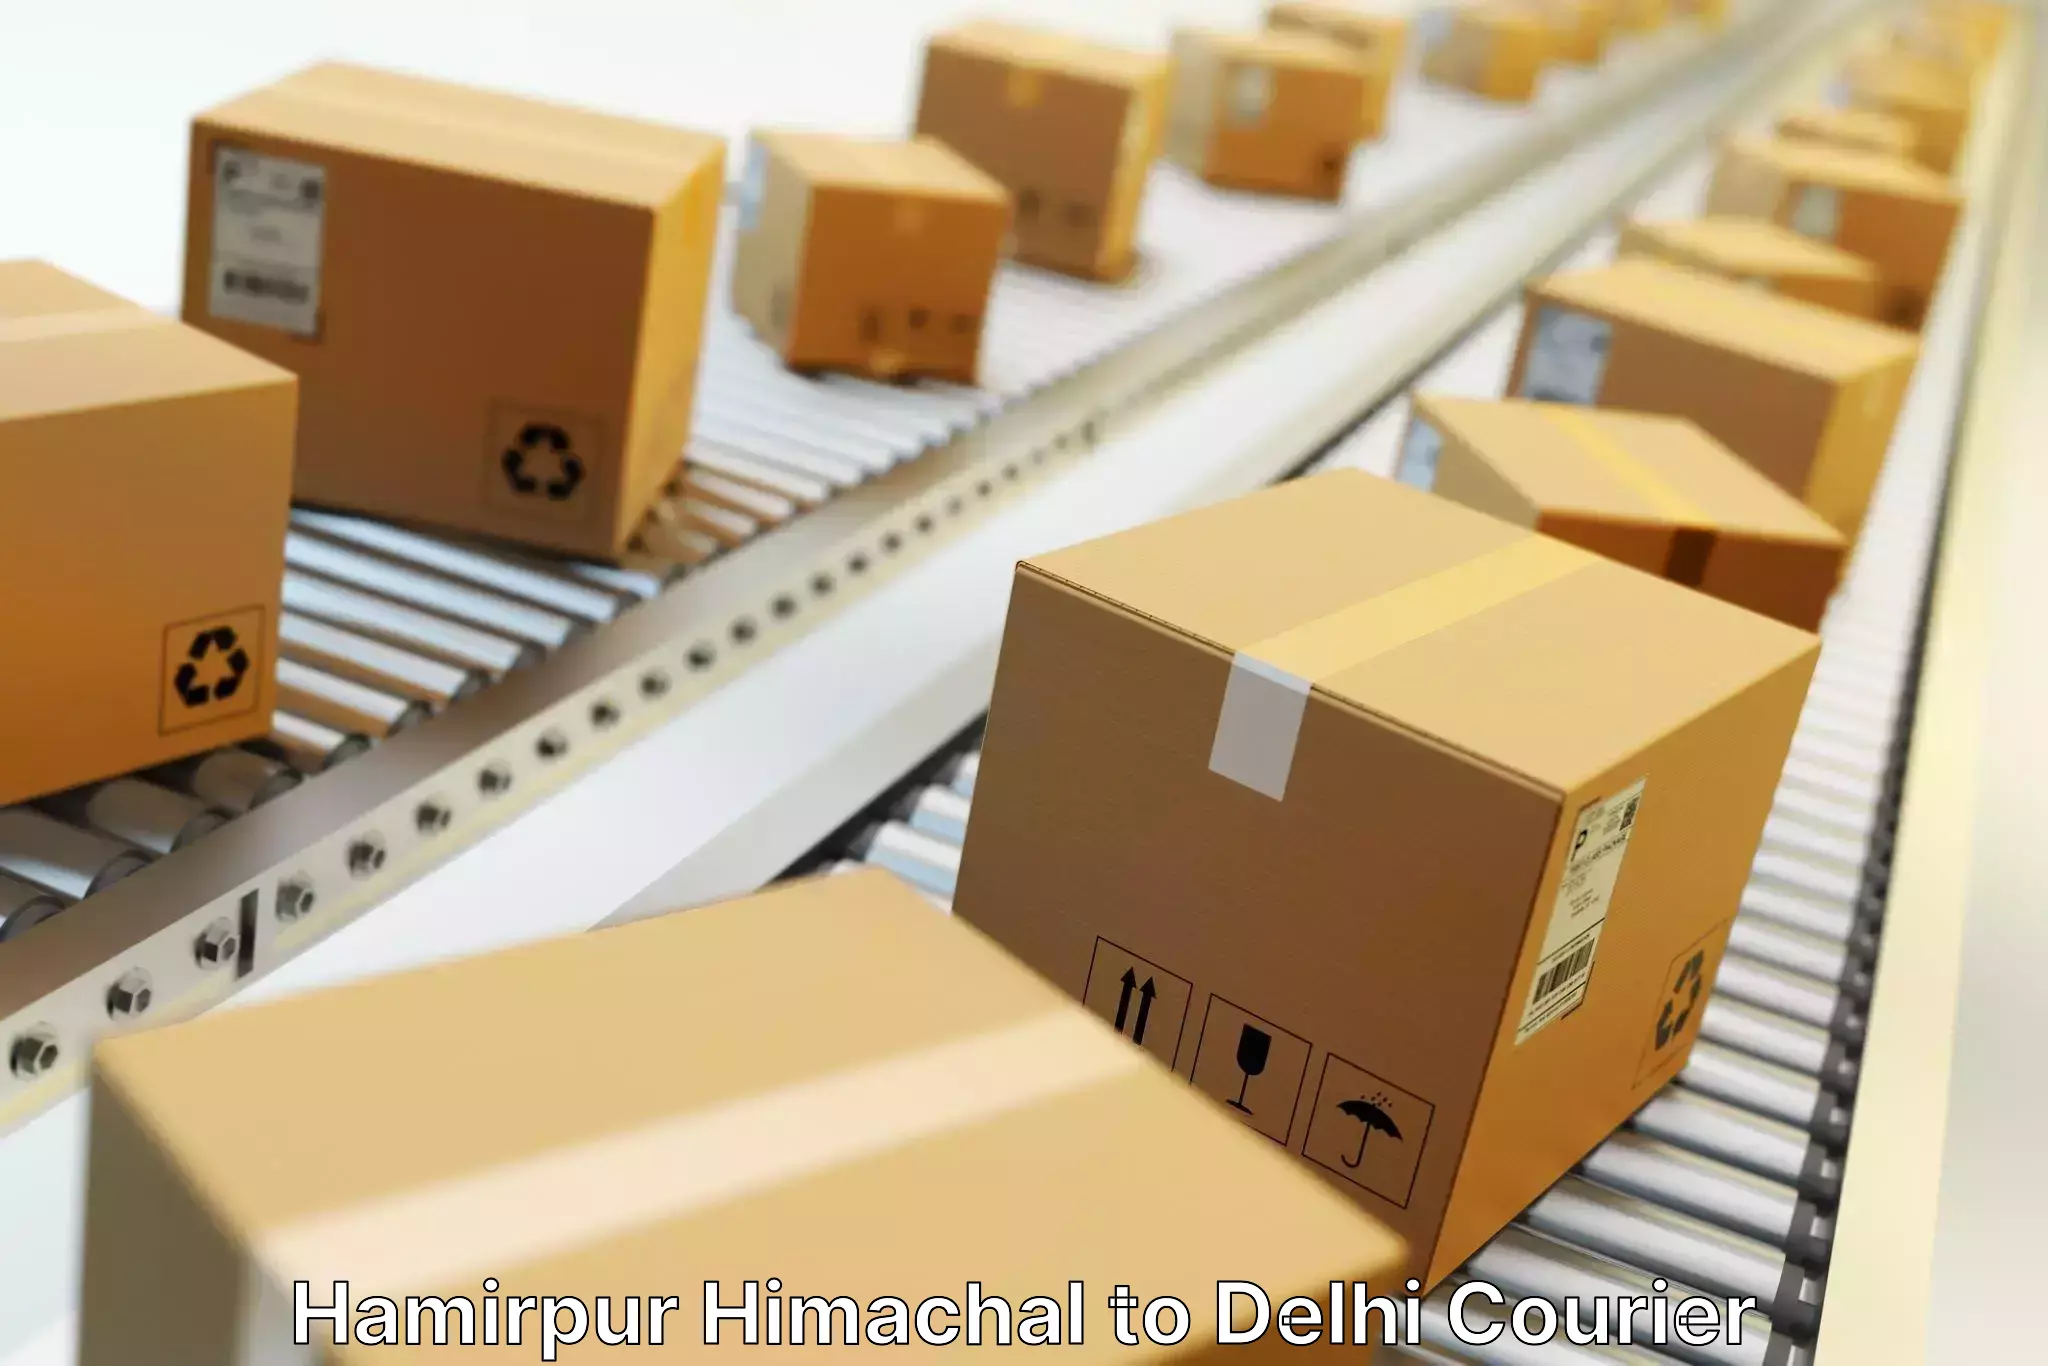 Comprehensive shipping services Hamirpur Himachal to NCR